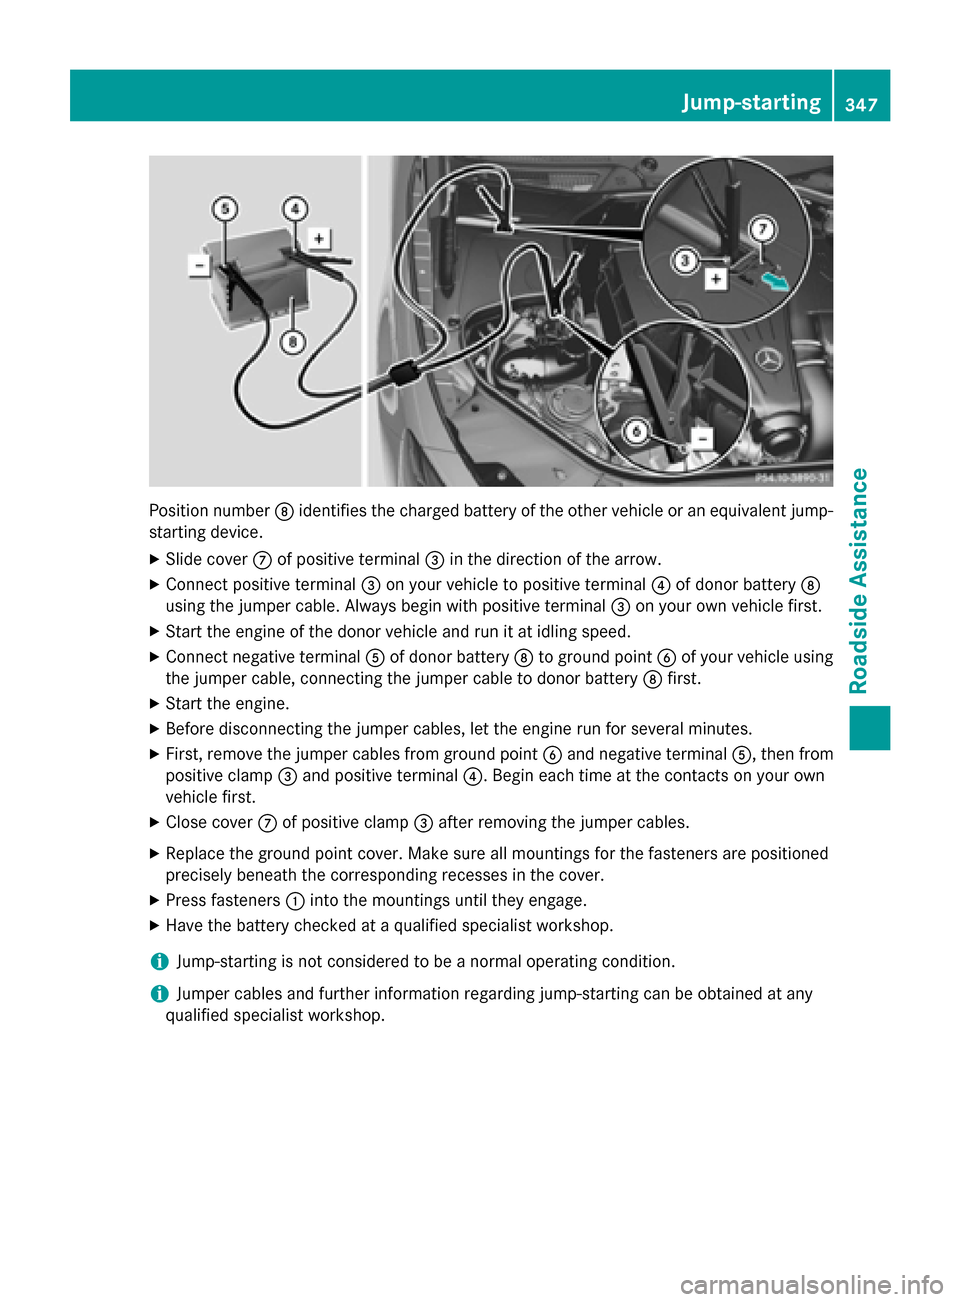 MERCEDES-BENZ S-Class COUPE 2015 C217 Service Manual Position number
006Cidentifies the charged battery of the other vehicle or an equivalent jump-
starting device.
X Slide cover 006Bof positive terminal 0087in the direction of the arrow.
X Connect posi